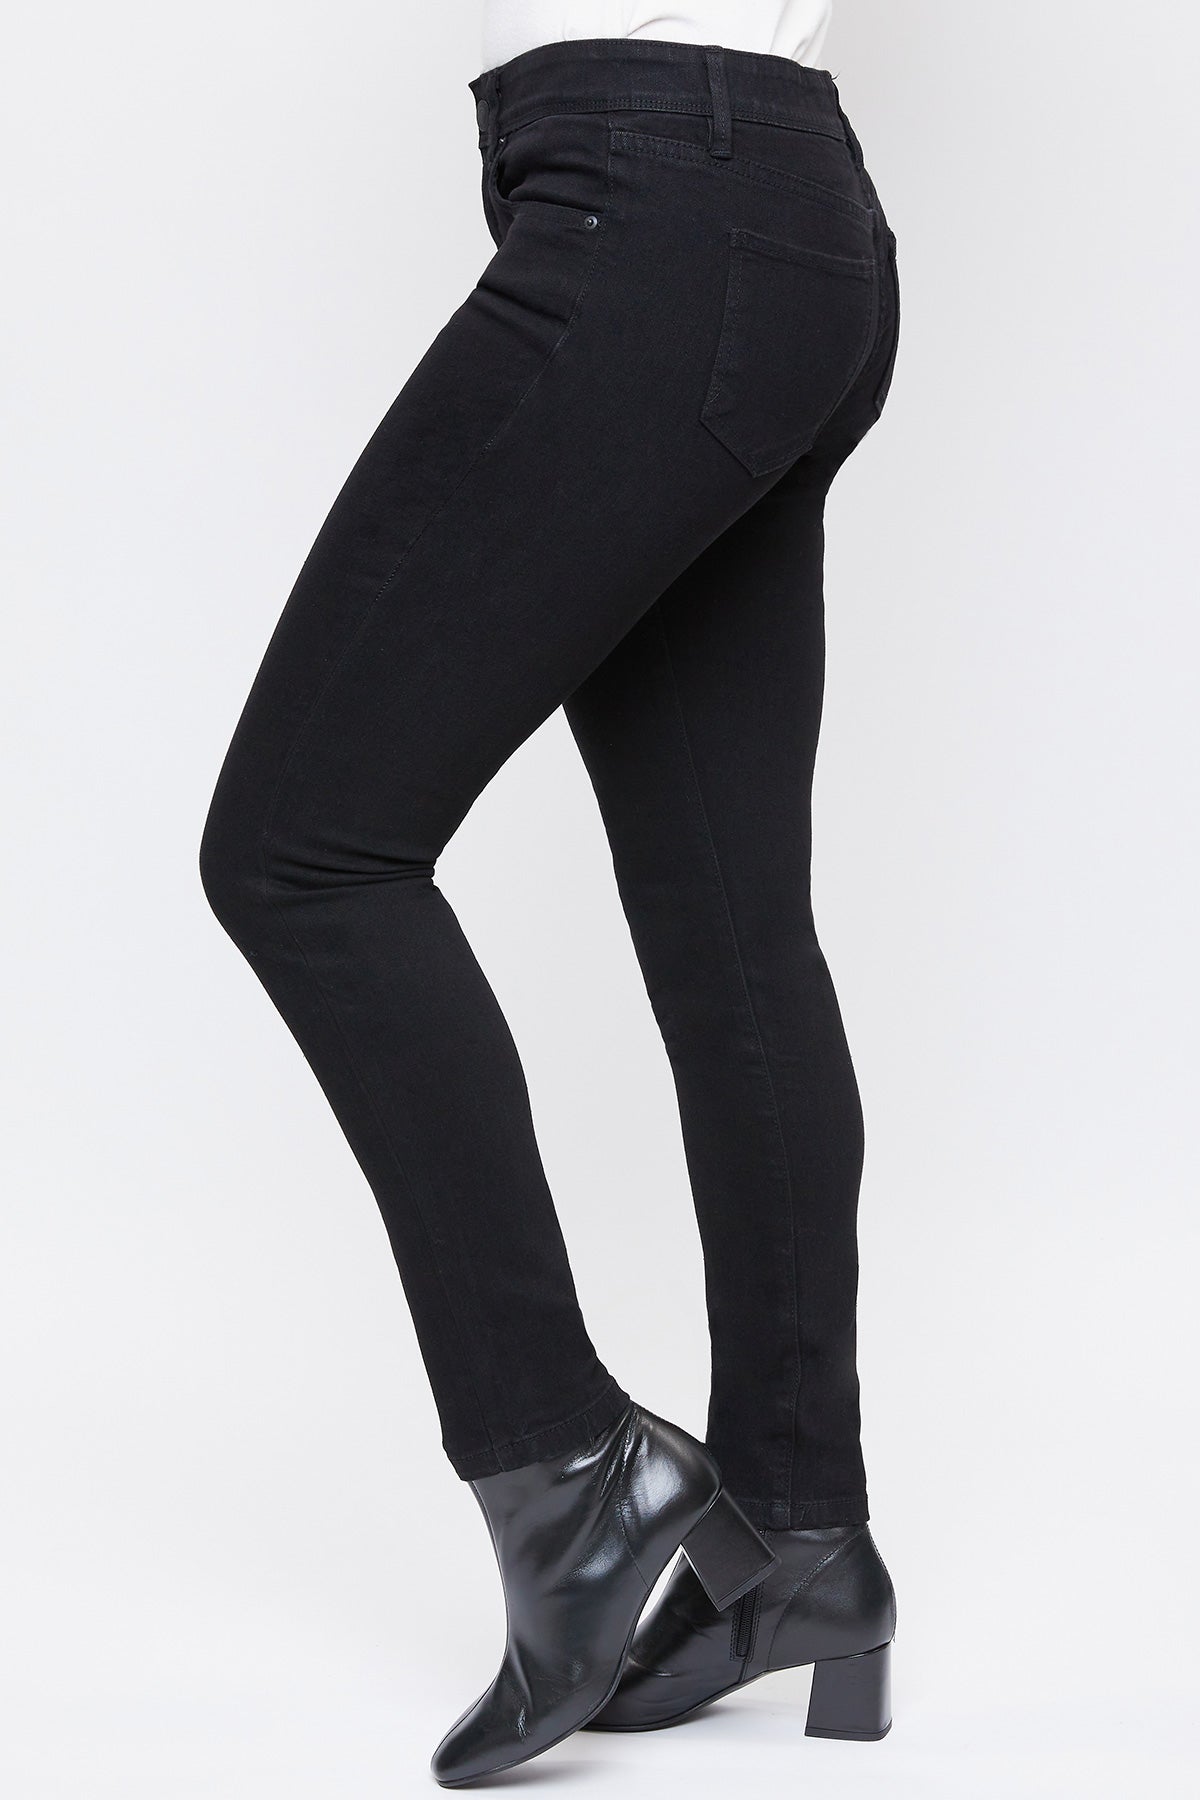 Missy Plus Mid Rise Jogger Pant 6 Pack from Royalty for Me